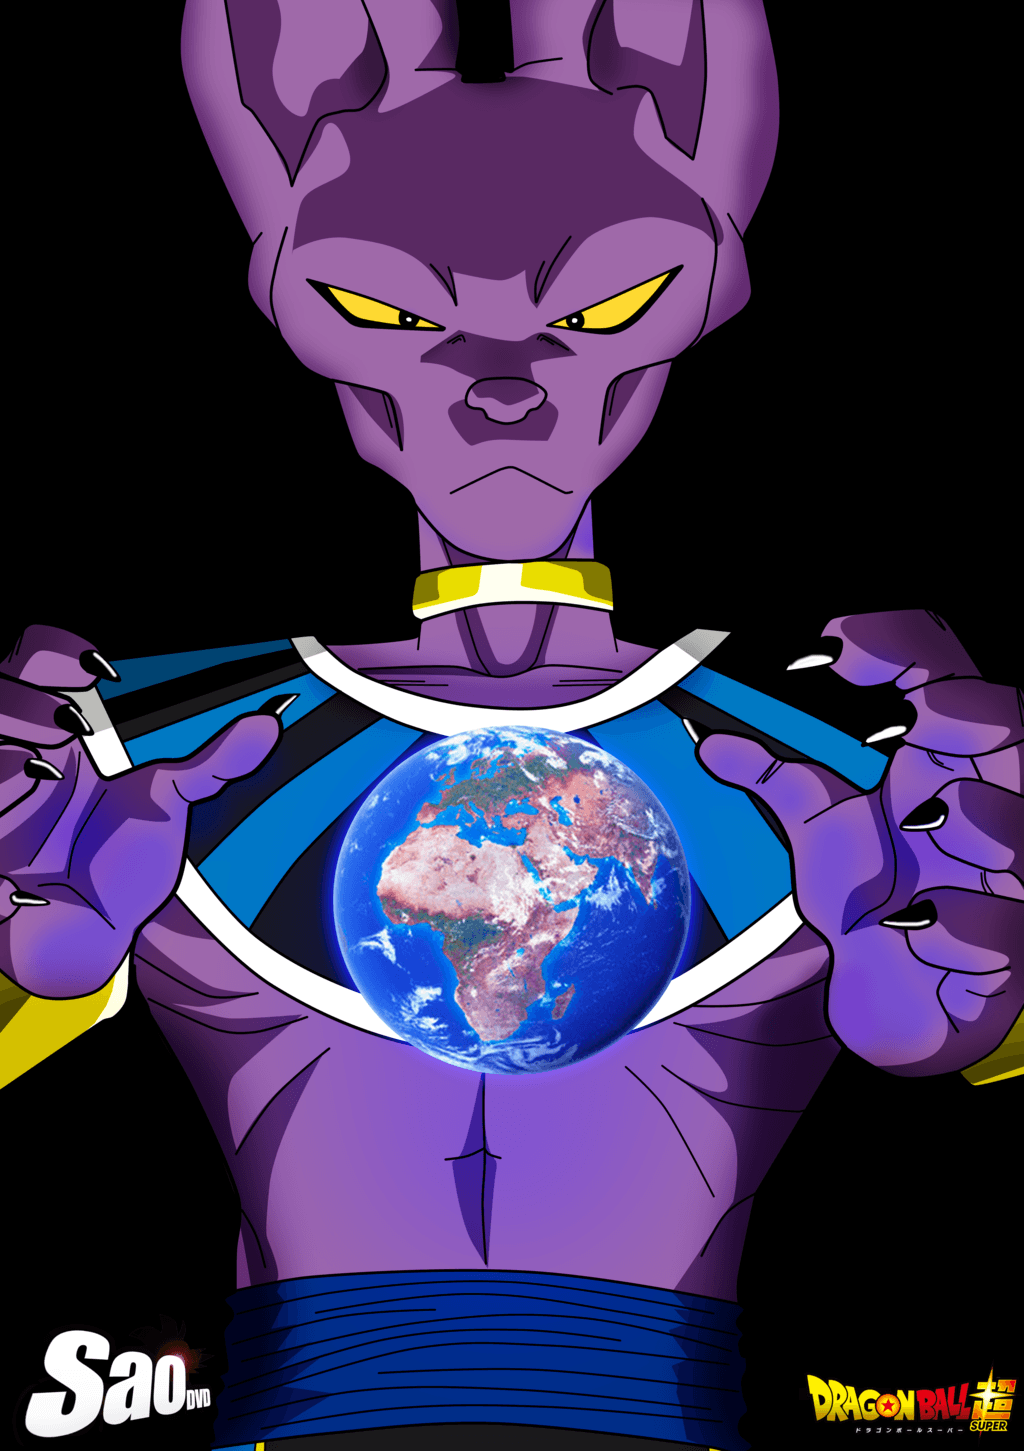 Beerus the Power of the God of Destruction